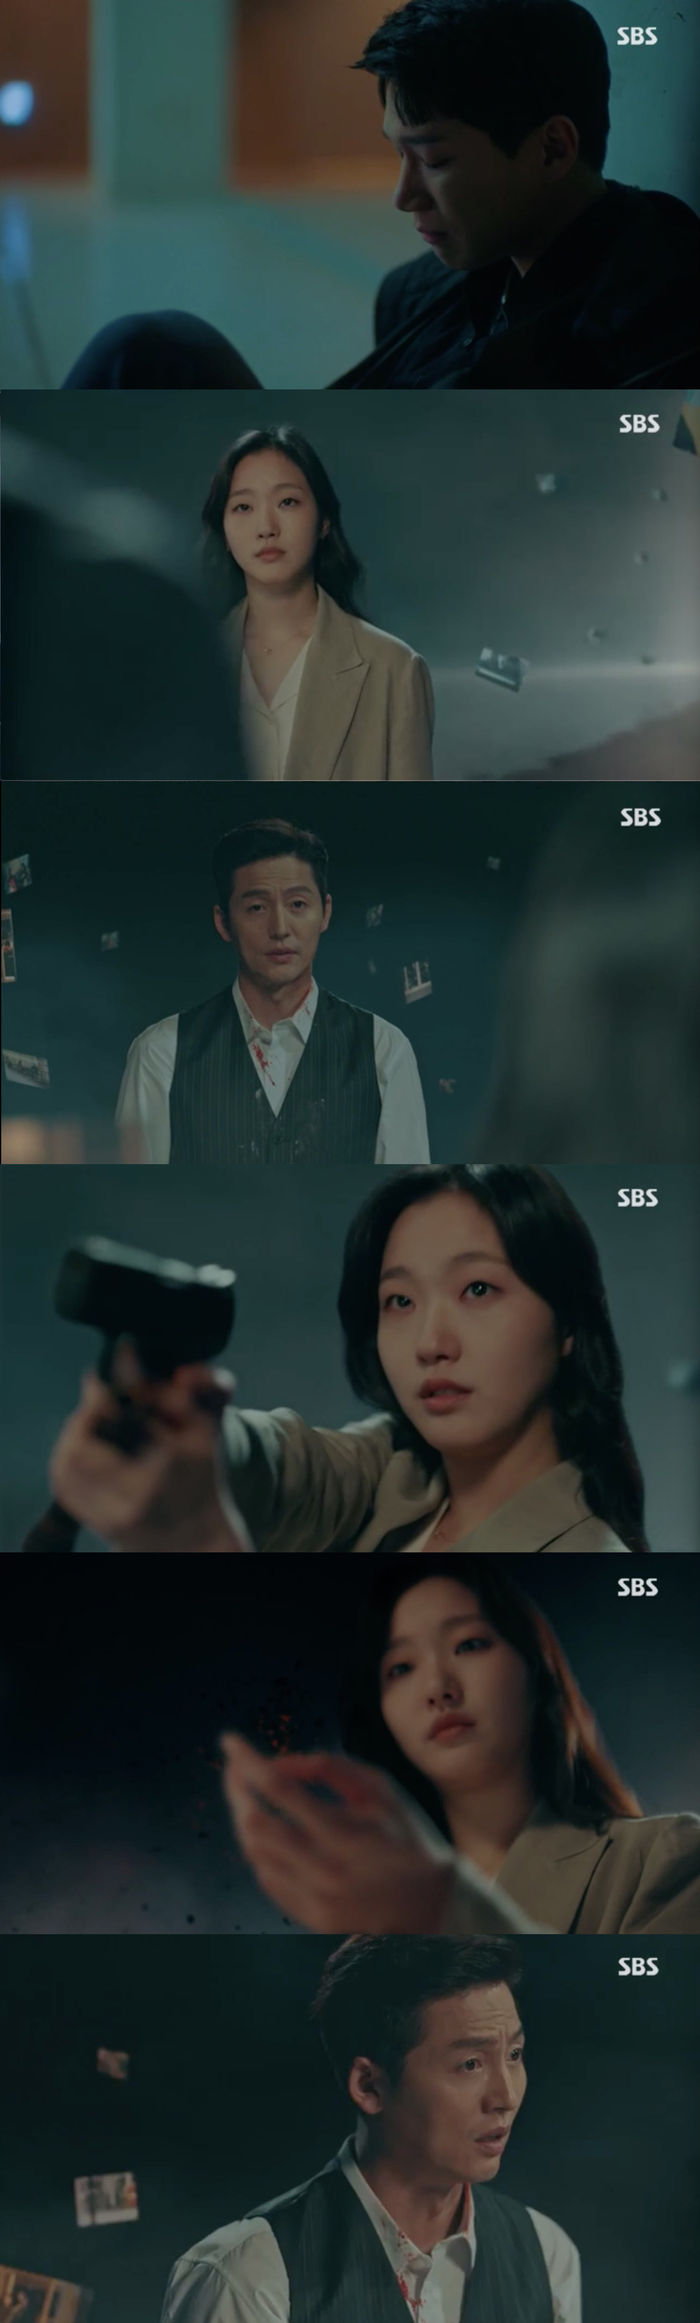 Kim Go-eun remains in the dimension between Lee Jung-jin and 1 and 0.In SBSs Golden Earth Drama The King - Eternal Monarch, which was broadcast on the 12th, Jung Tae-eul (Kim Go-eun) was shown along with Lee Jung-jin to the night of station memory.On the same day, Jung Tae-eul left his father and Kang Shin-jae (Kim Kyung-nam) in South Korea and headed for the door of the dimension.Irim and I stopped in the space between 1 and 0 beyond the door of the dimension. Irim asked Jung Tae what he intended to do.Then Jung Tae-eul said, We have to wait until Lee Min-ho stops you from the past and returns the world. If Leeon fails, I will stop you.Lee said, If your nephew returns the world, you will have no memory of this, but what will you do?Jung Tae-eul said, So I feel sick, because all the brilliant memories remain in the middle. And Jung Tae-eul pointed a gun at Irim.Irim laughed at Jung Tae and said, I can not shoot here. Nothing flows. Then no one is yet.If he hadnt shot, he said he couldnt know.And at that moment, the ink that Jung Tae-eul had in his hand disappeared because Irim had done this and got the whole food at night of station memory.If mine disappeared, my nephews half would have disappeared. What? Igon will never come back. You are trapped here with me forever.